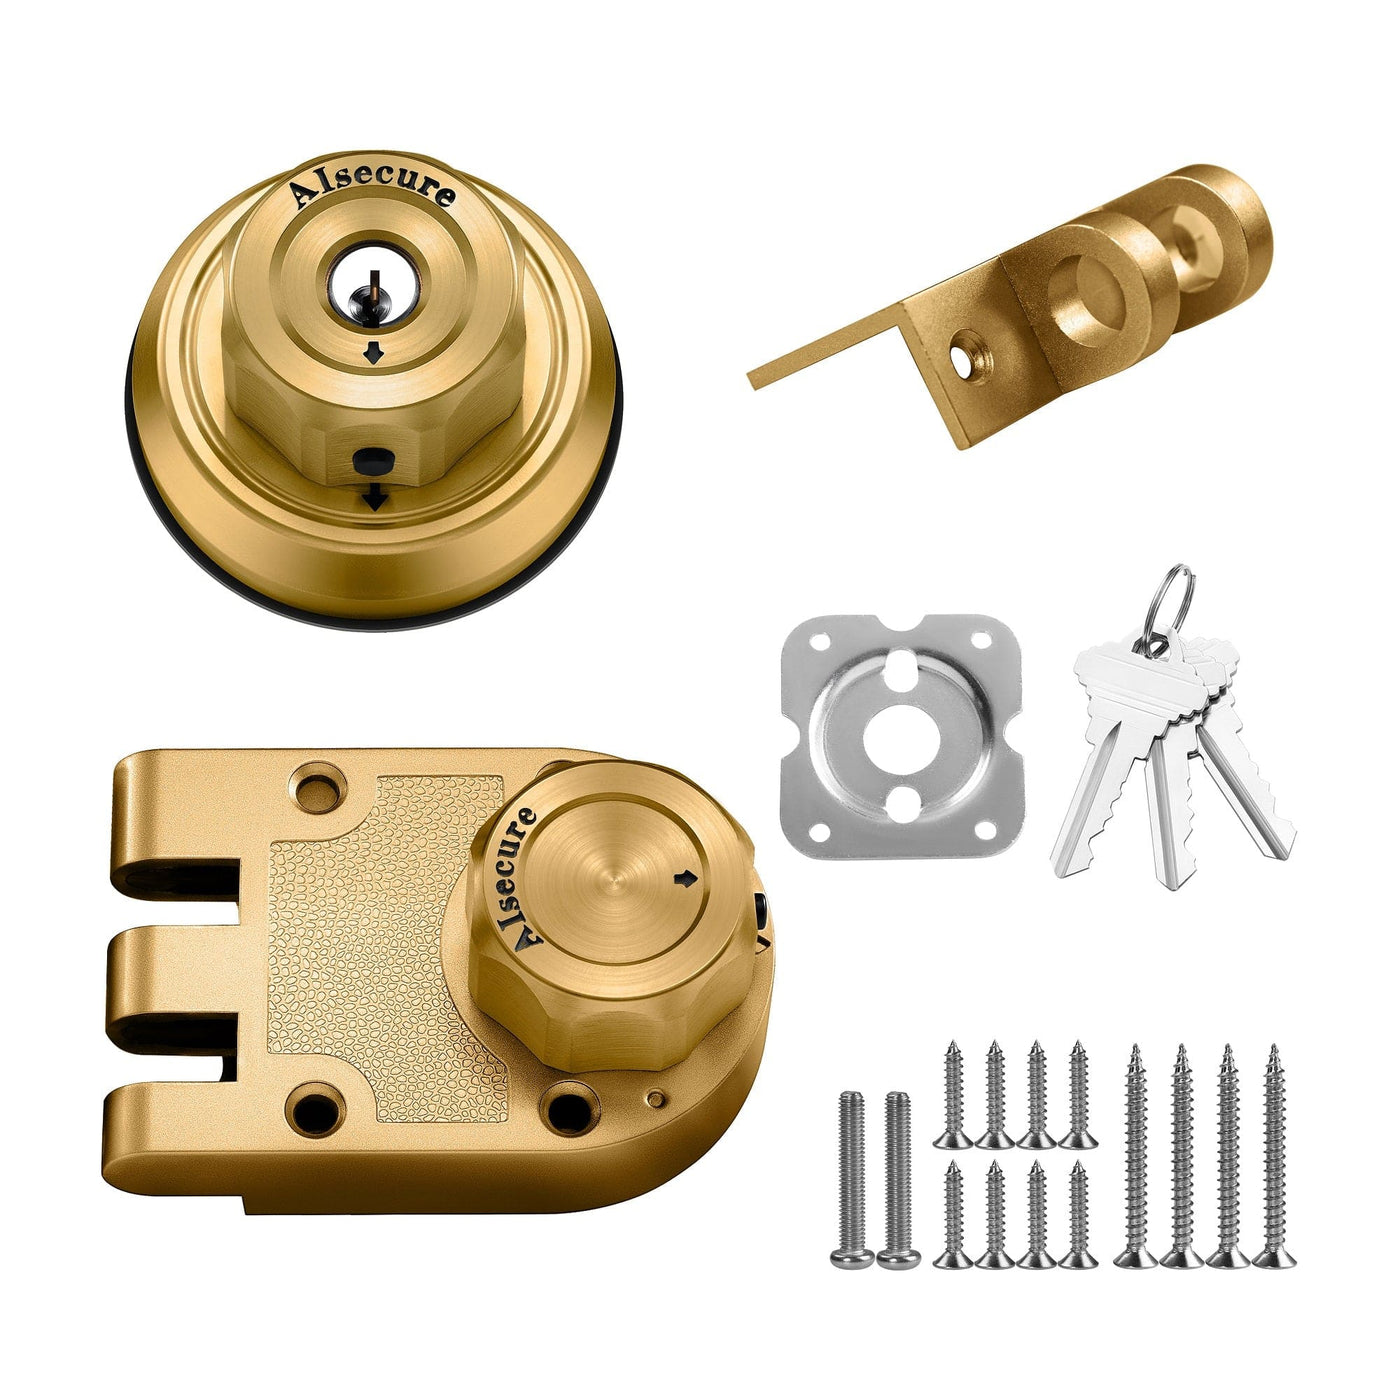 3*A9 AIsecure Jimmy Proof Lock (stainless steel casting) --- Brass Key alike combo